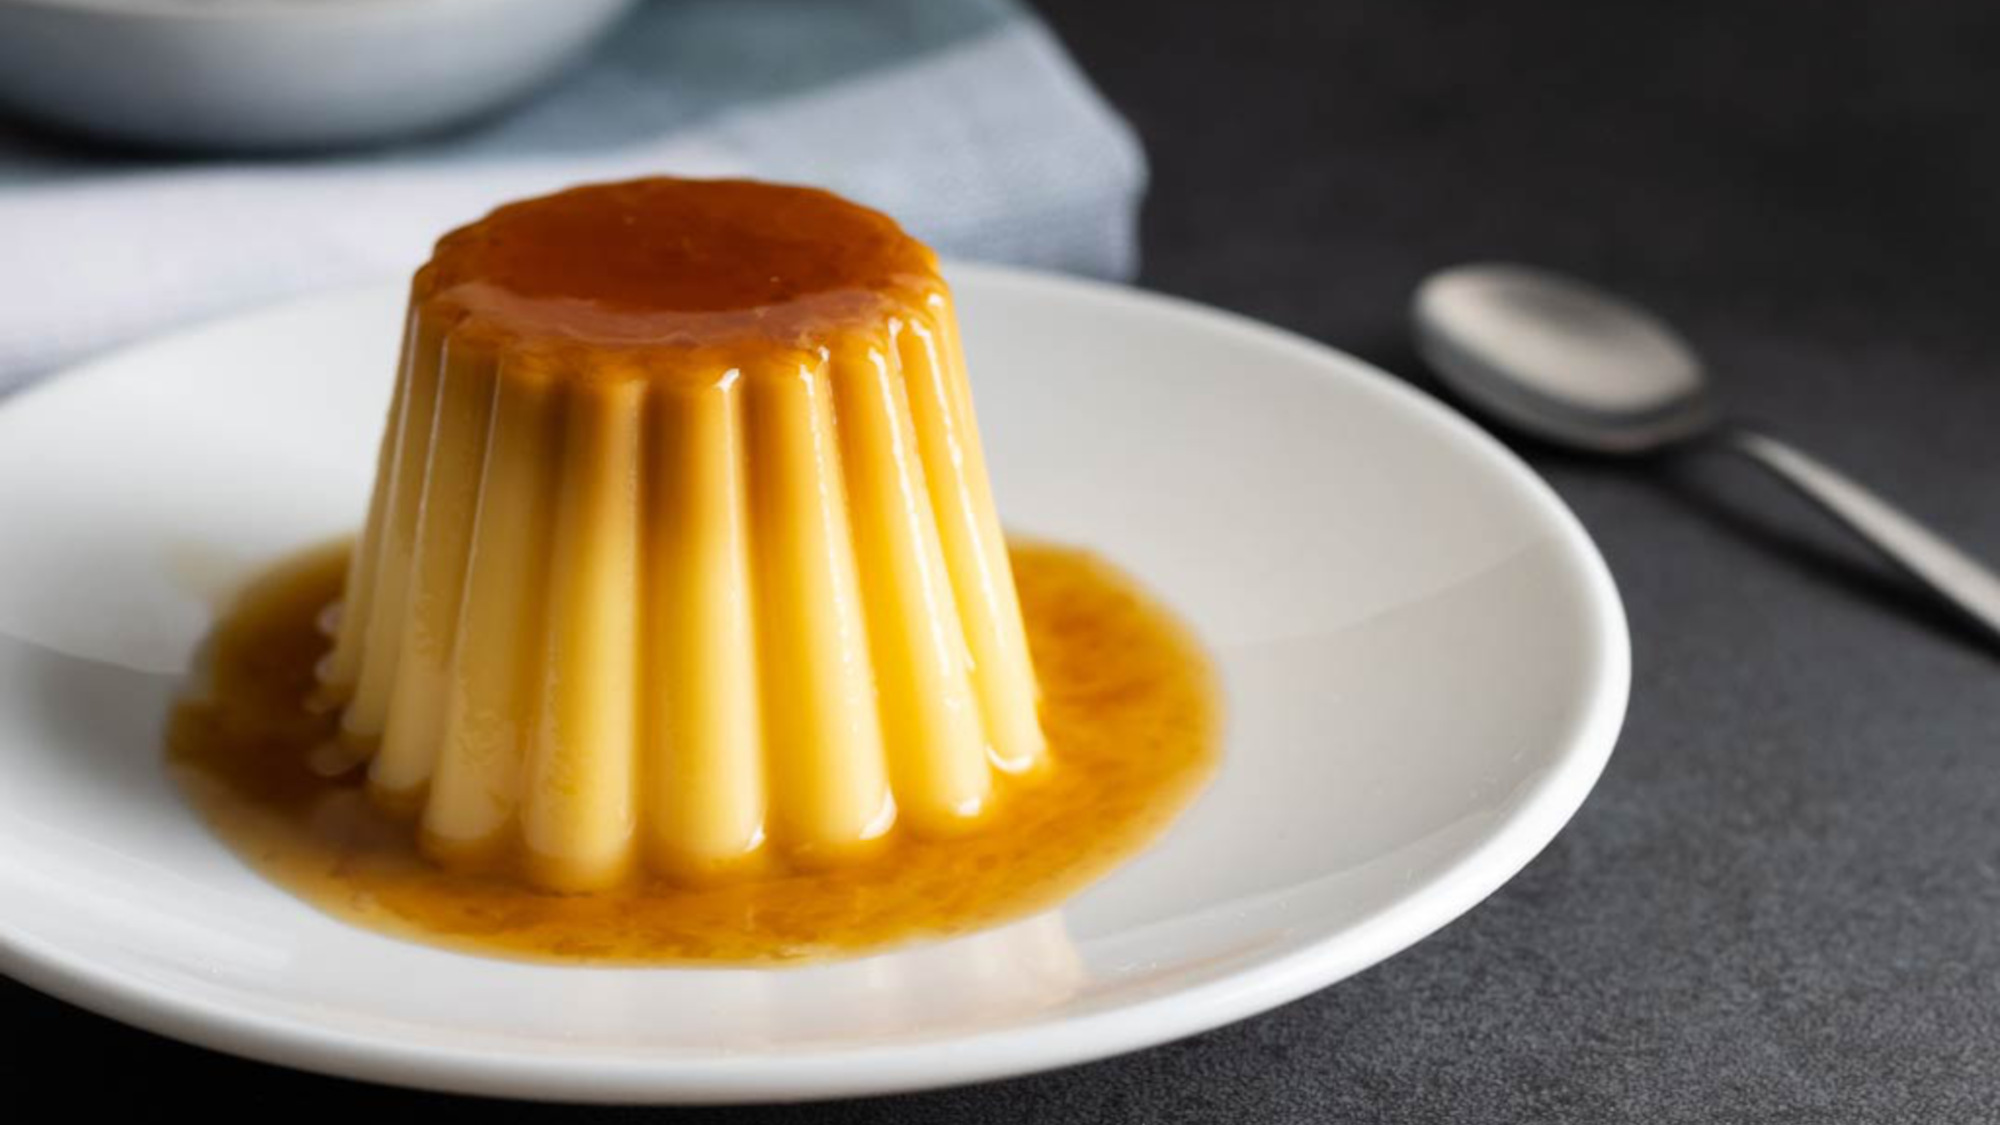 A small vanilla pudding sits on a plate and is covered with caramel sauce